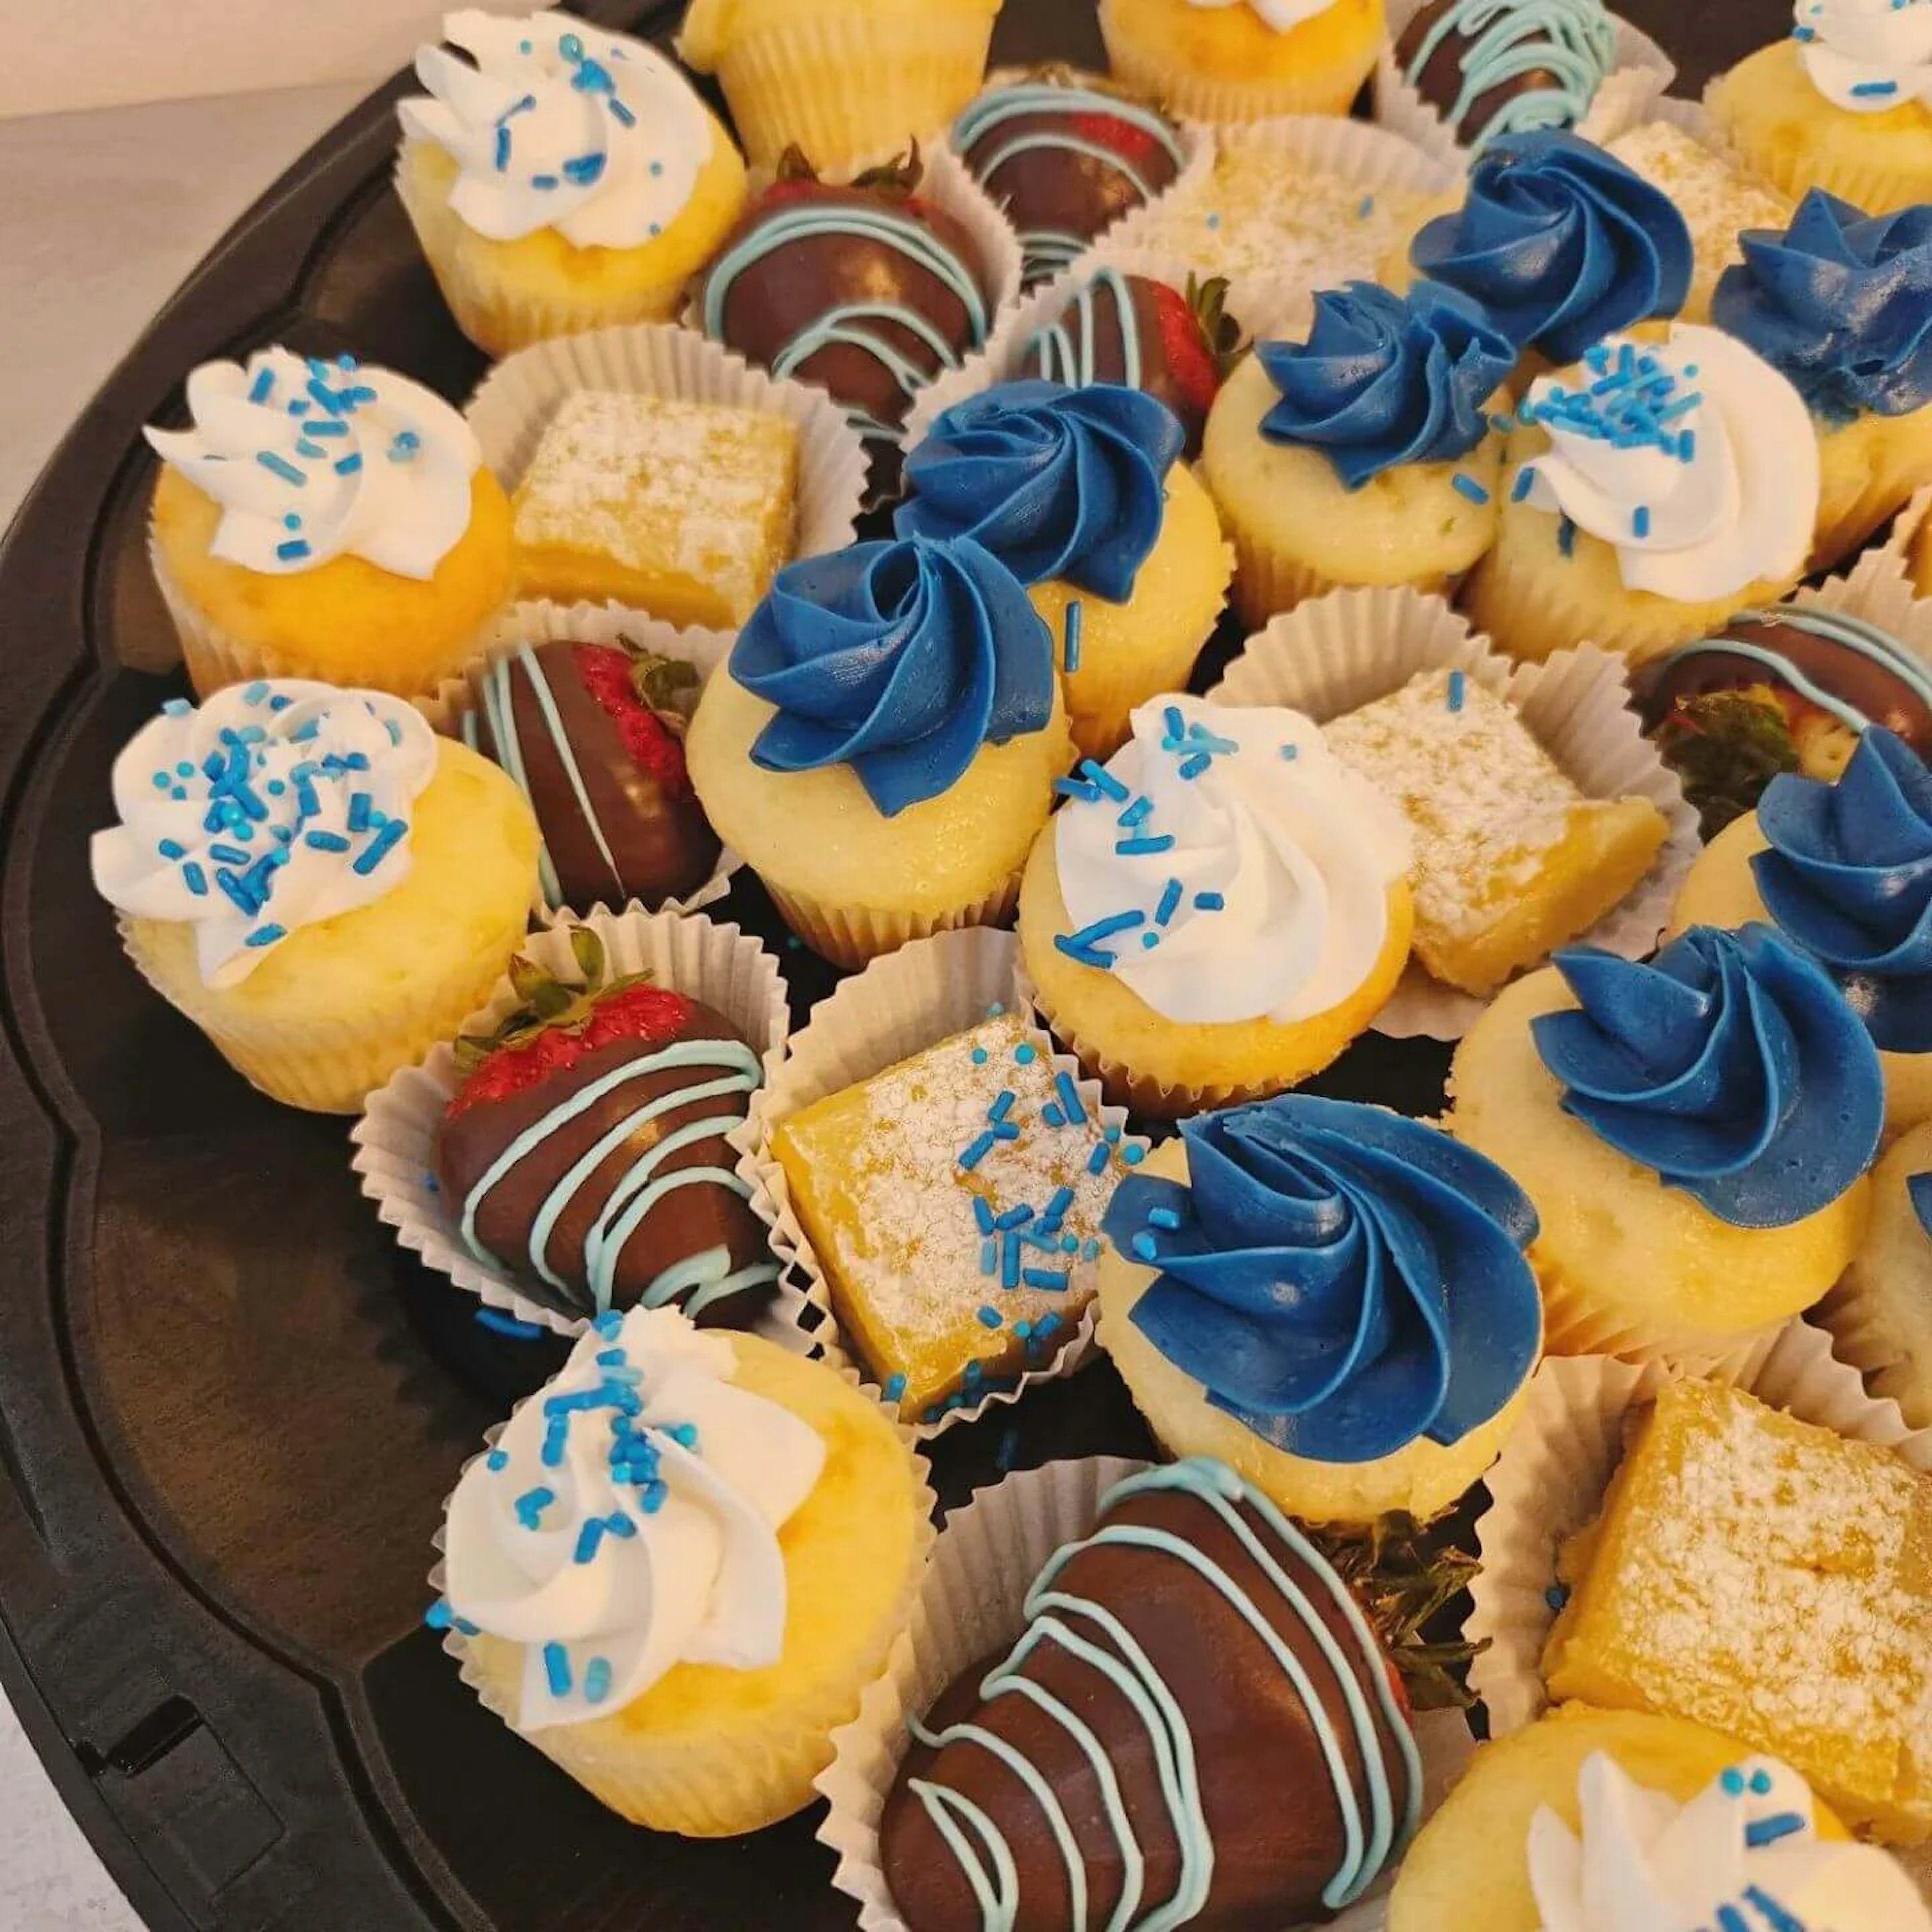 A tray of small cakes with blue and white frosting.